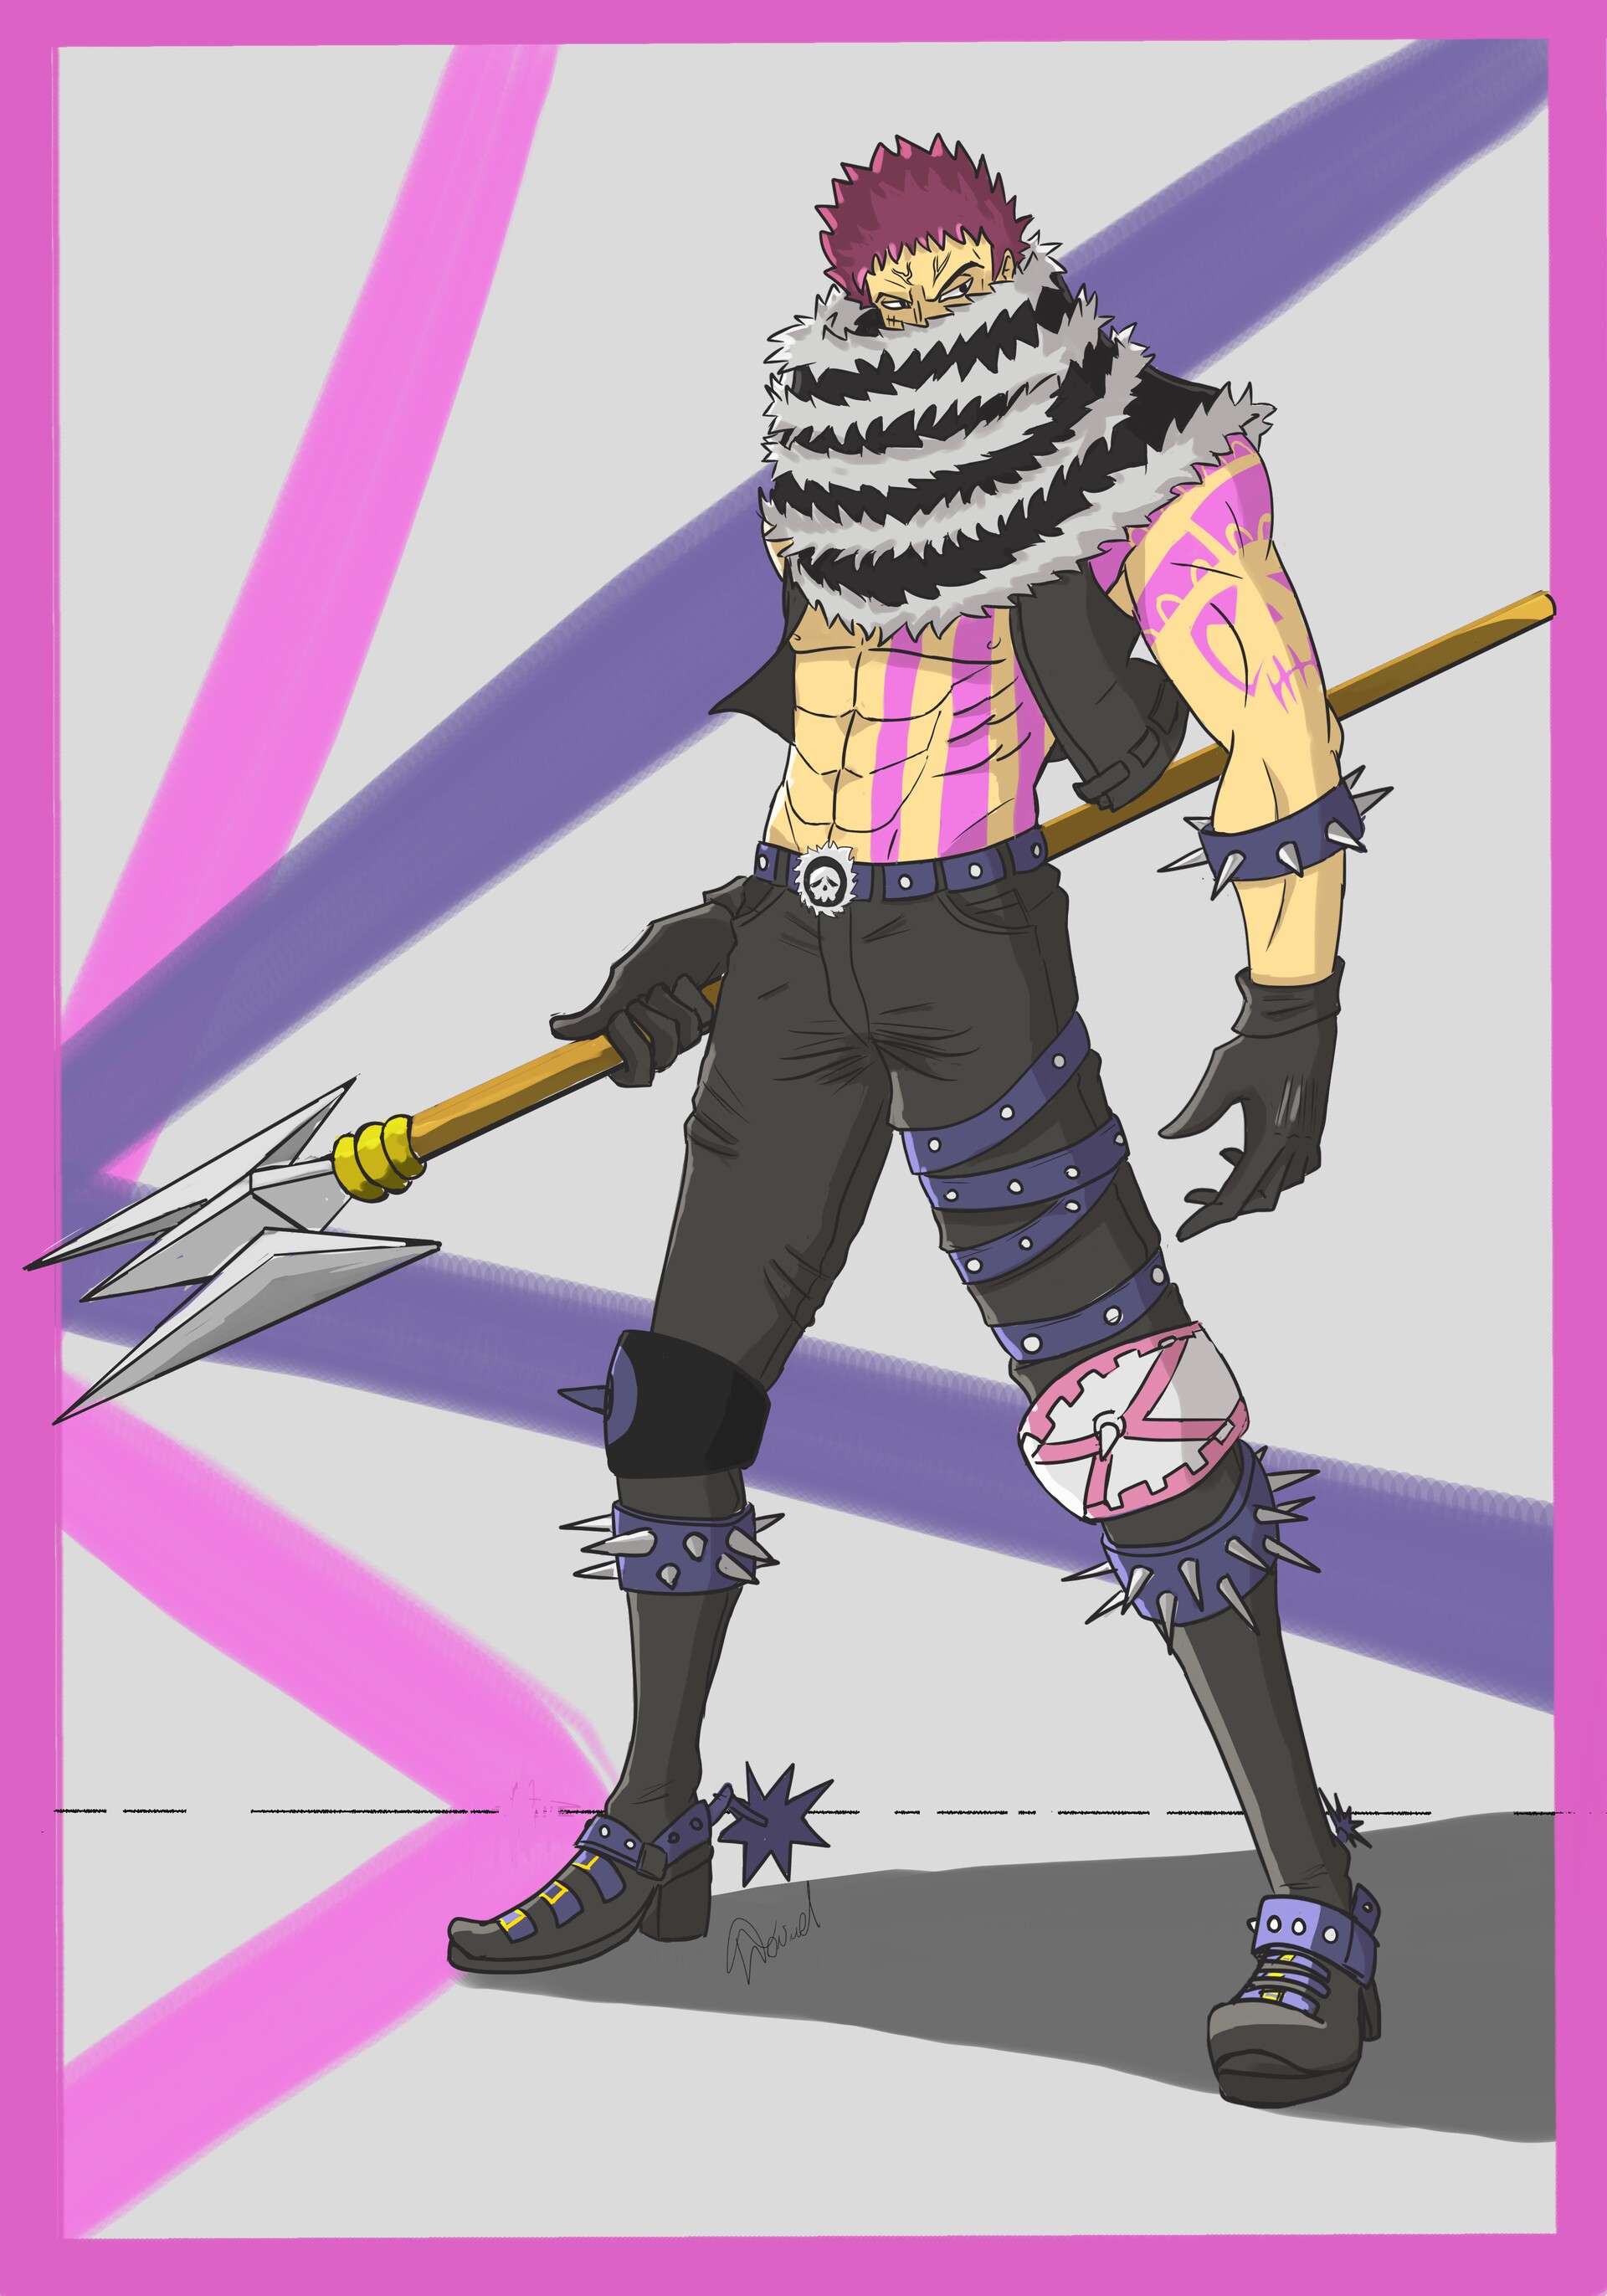 One of the most dangerous villains Luffy ever faced, Katakuri is the third ...